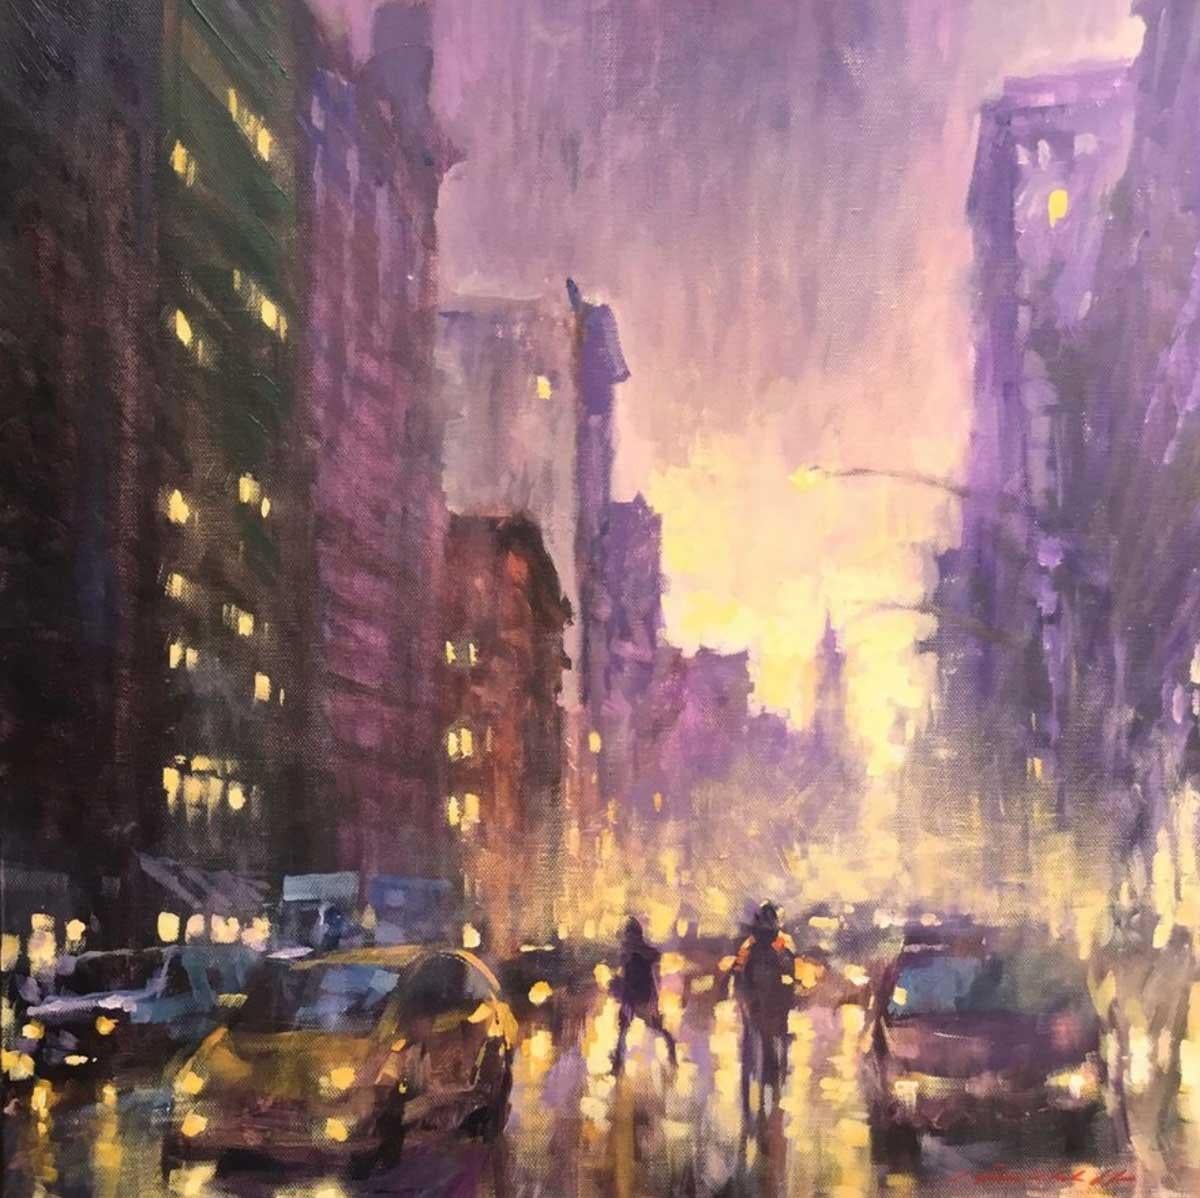 David Hinchliffe Landscape Painting - The Light are on in the Singer Building - Broadway, New York: Oil on Canvas